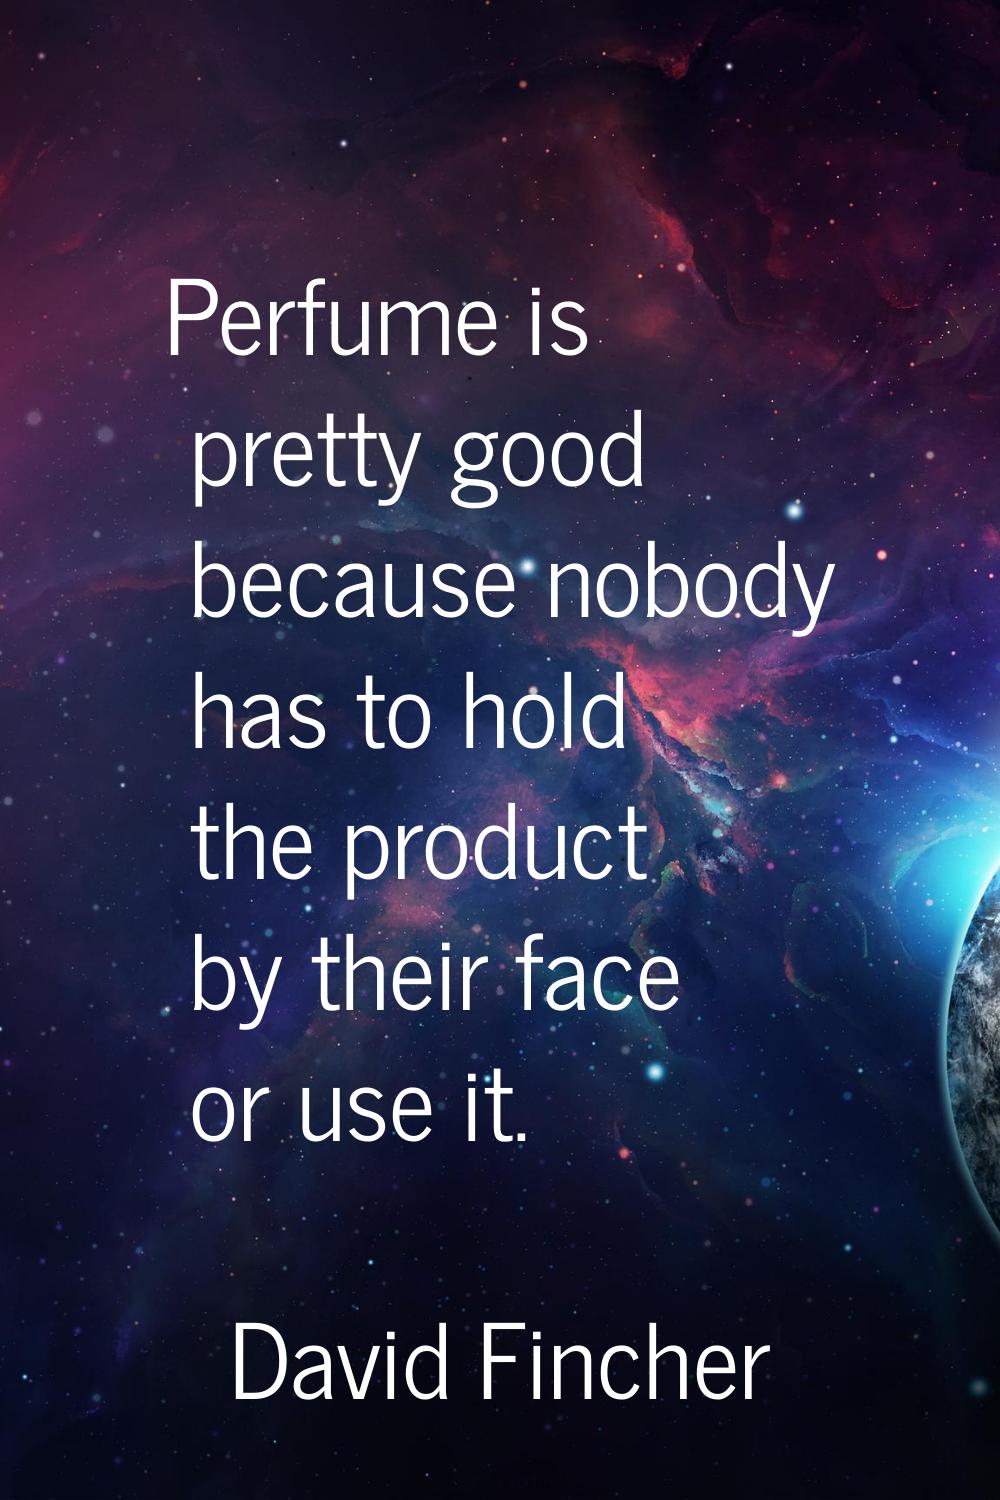 Perfume is pretty good because nobody has to hold the product by their face or use it.